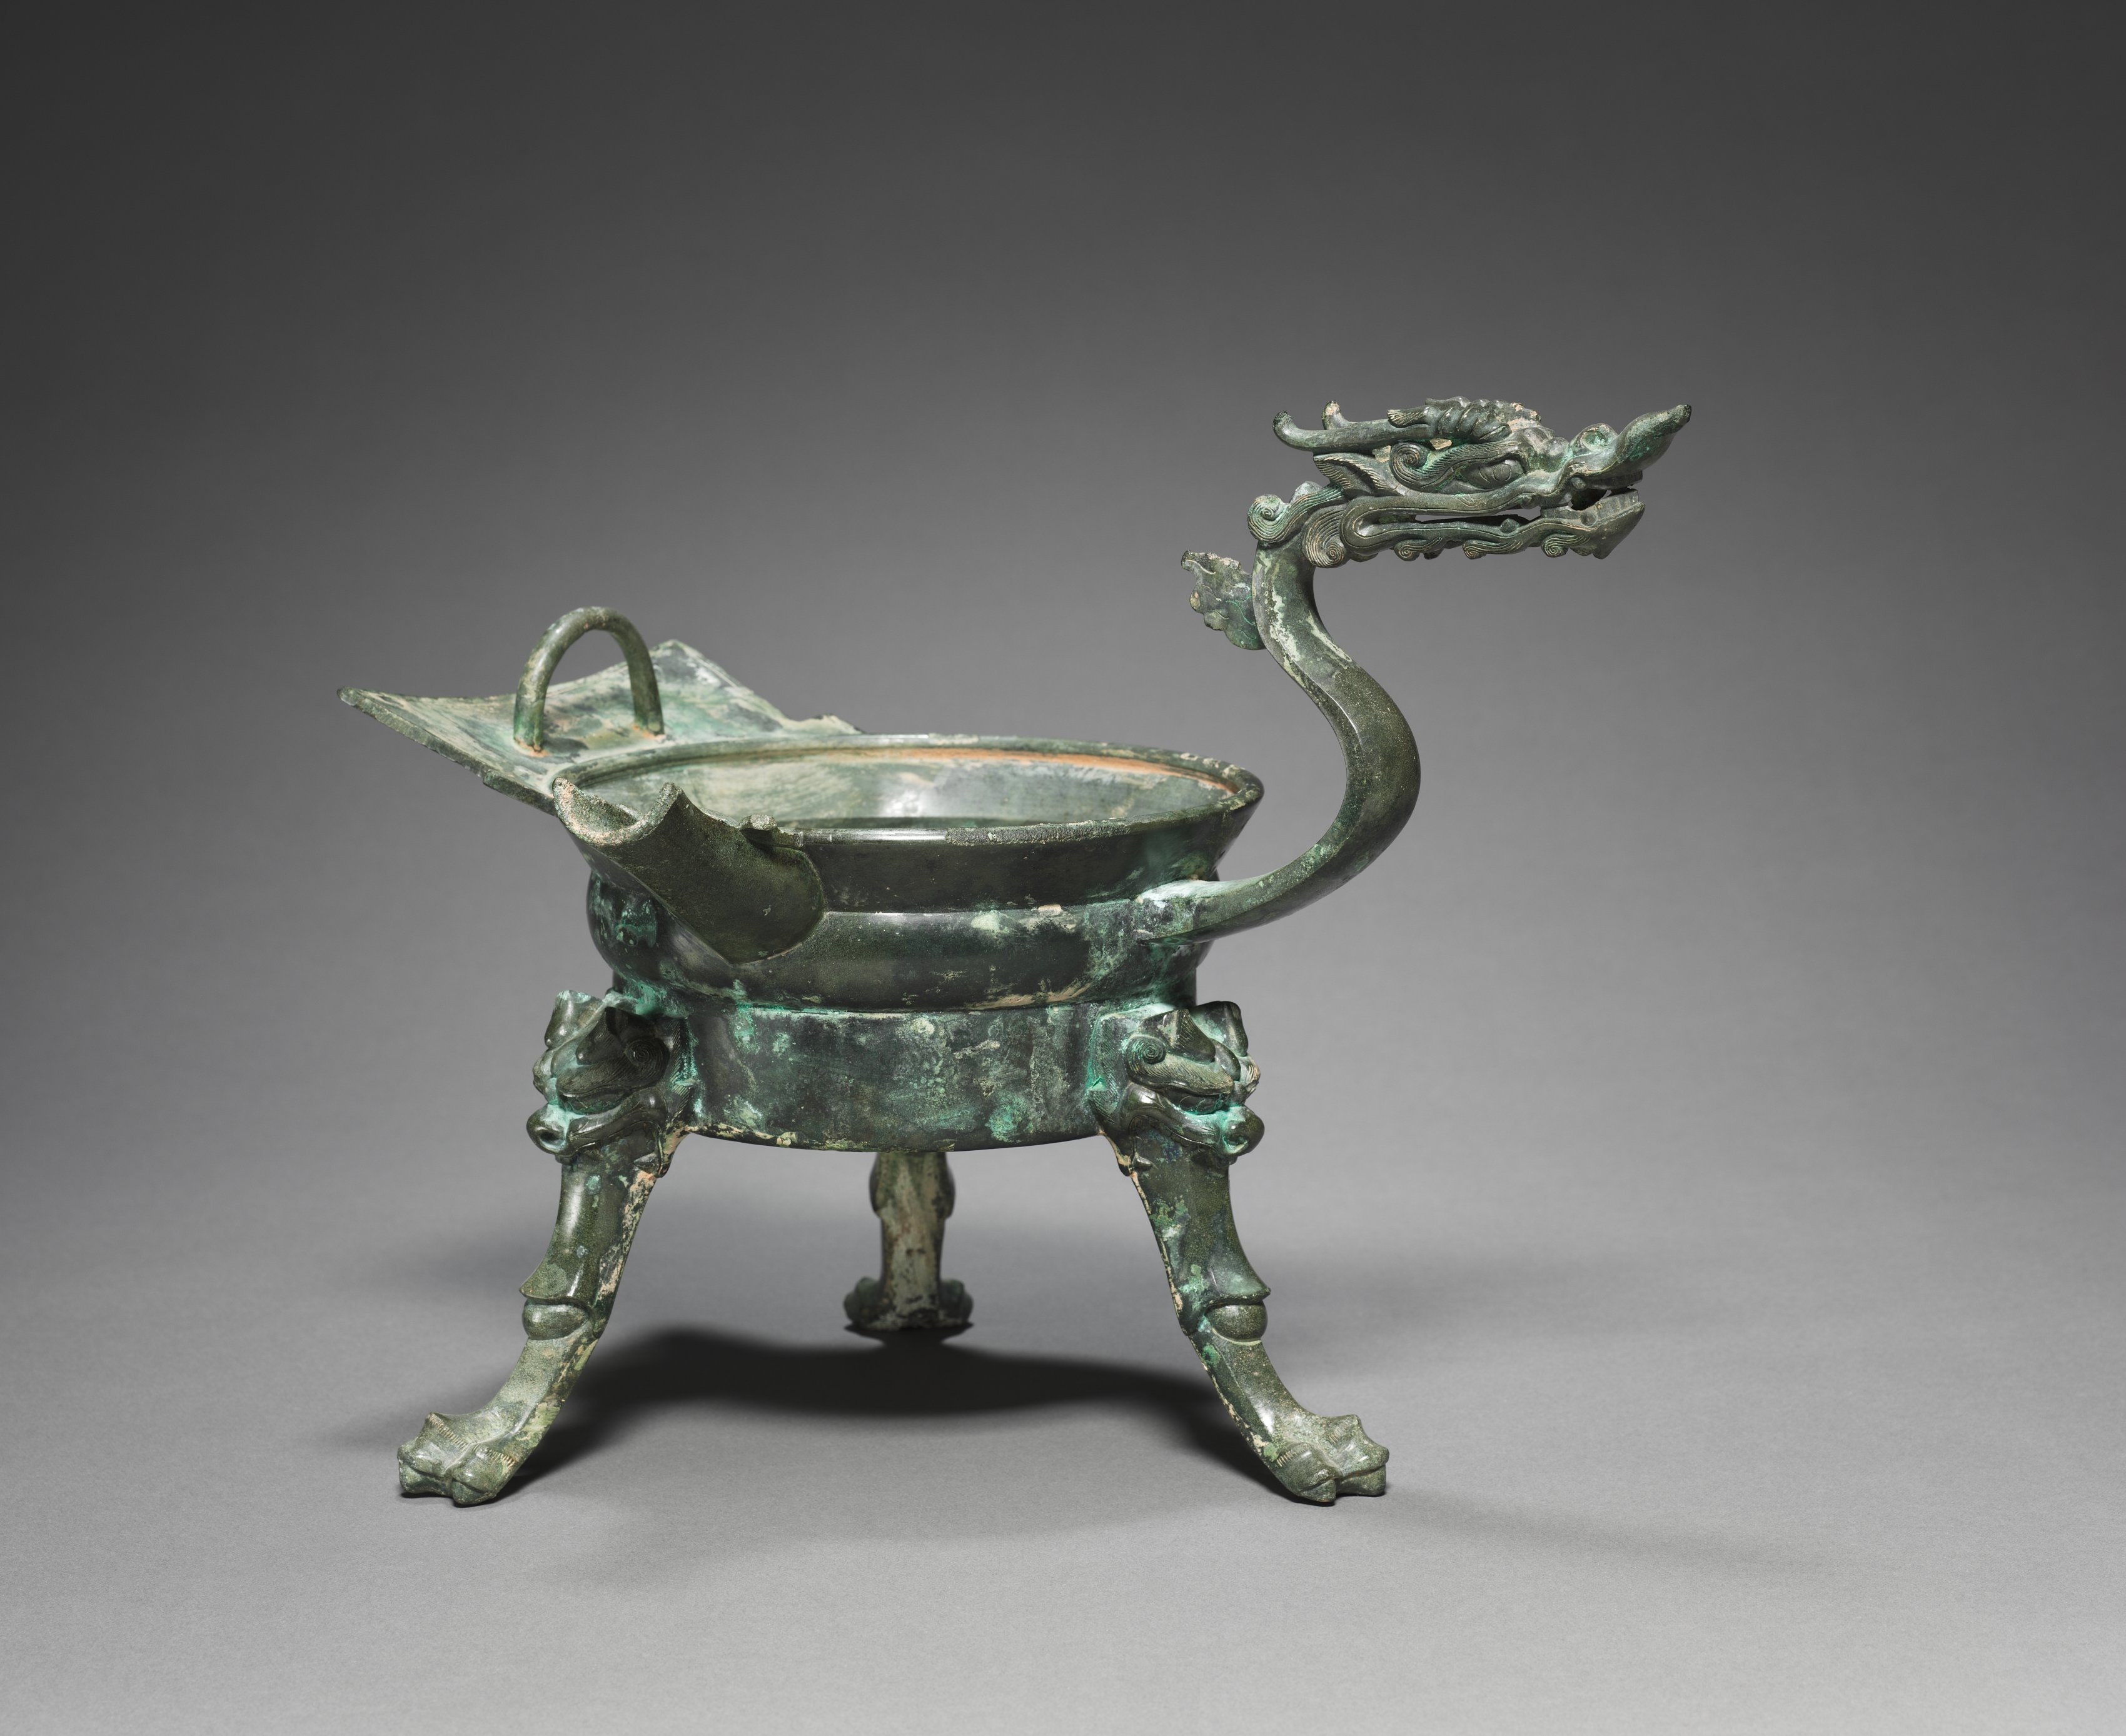 Tripod Container with Dragon-Head Handle (Zhadou)